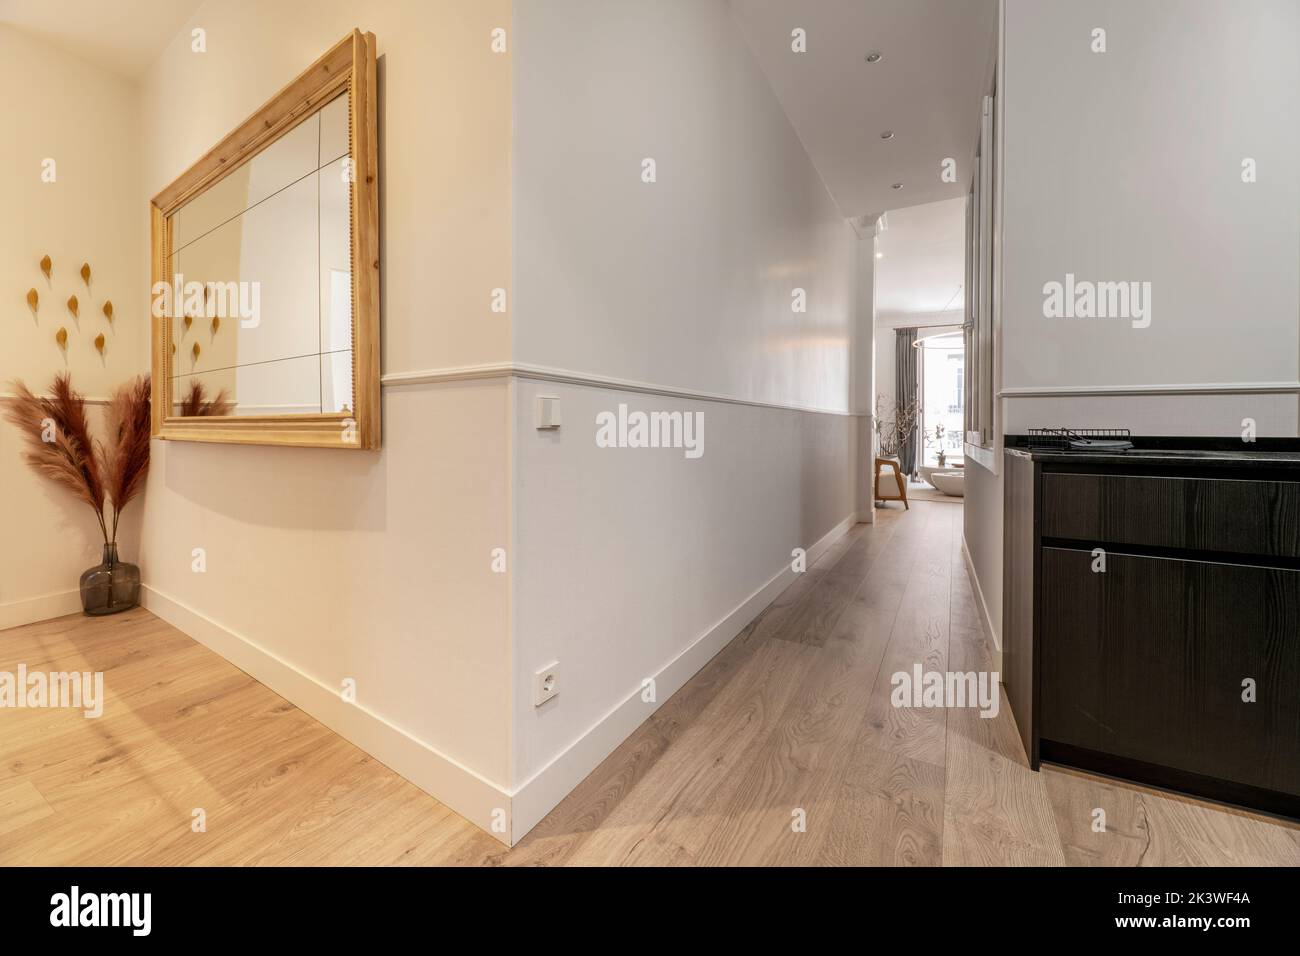 Entrance hall of a rental apartment with a long hallway and a wood-framed mirror Stock Photo